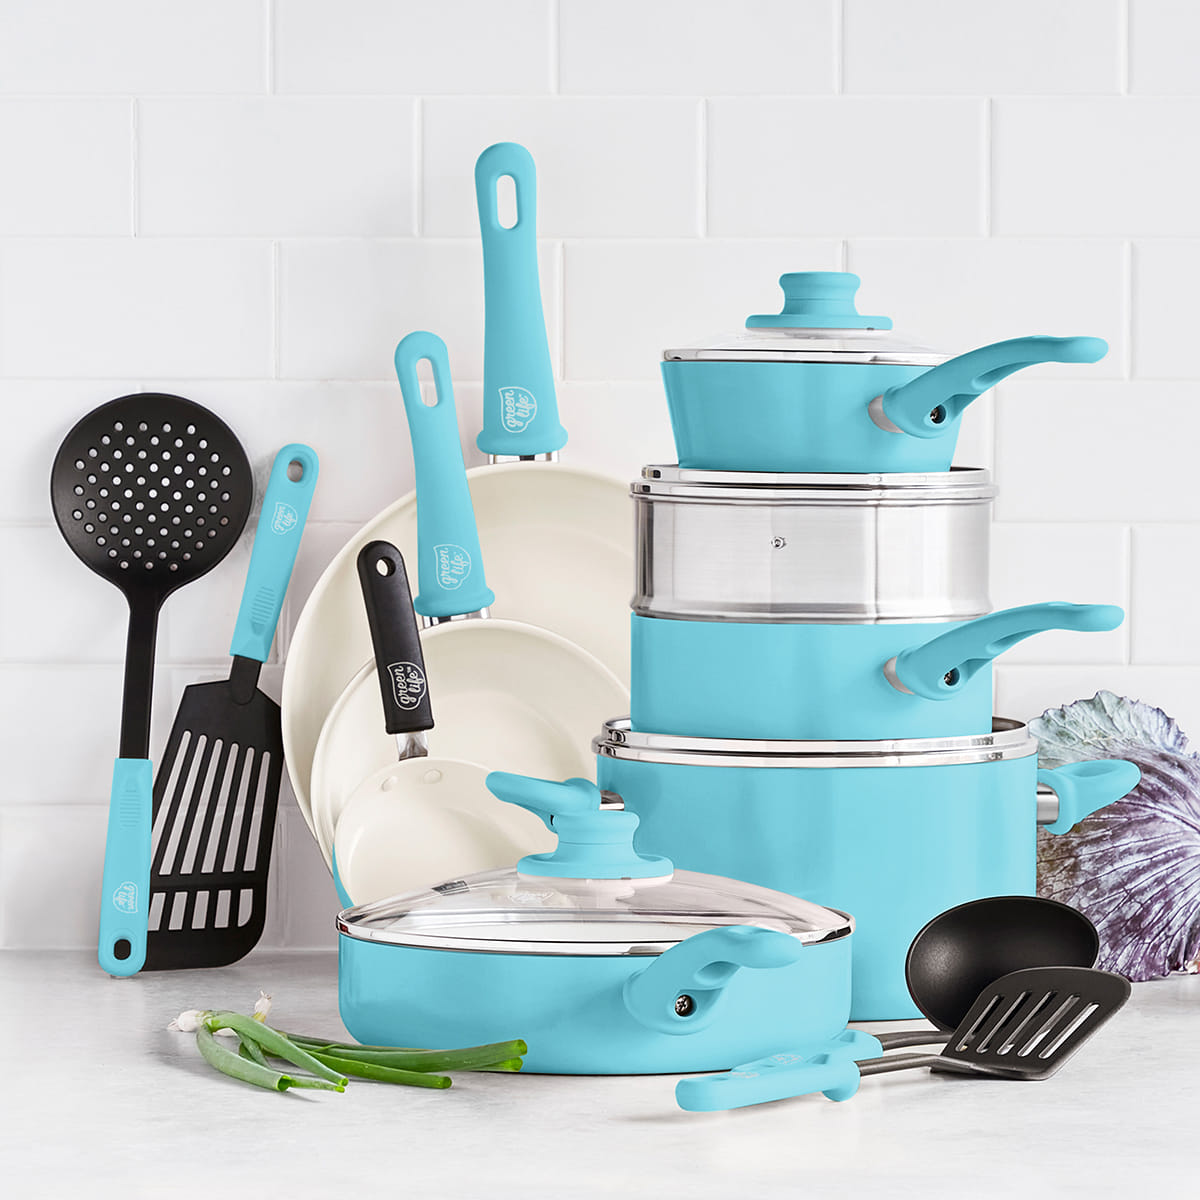 GreenLife Soft Grip 16 Piece Ceramic Non-Stick Cookware Set, Turquoise